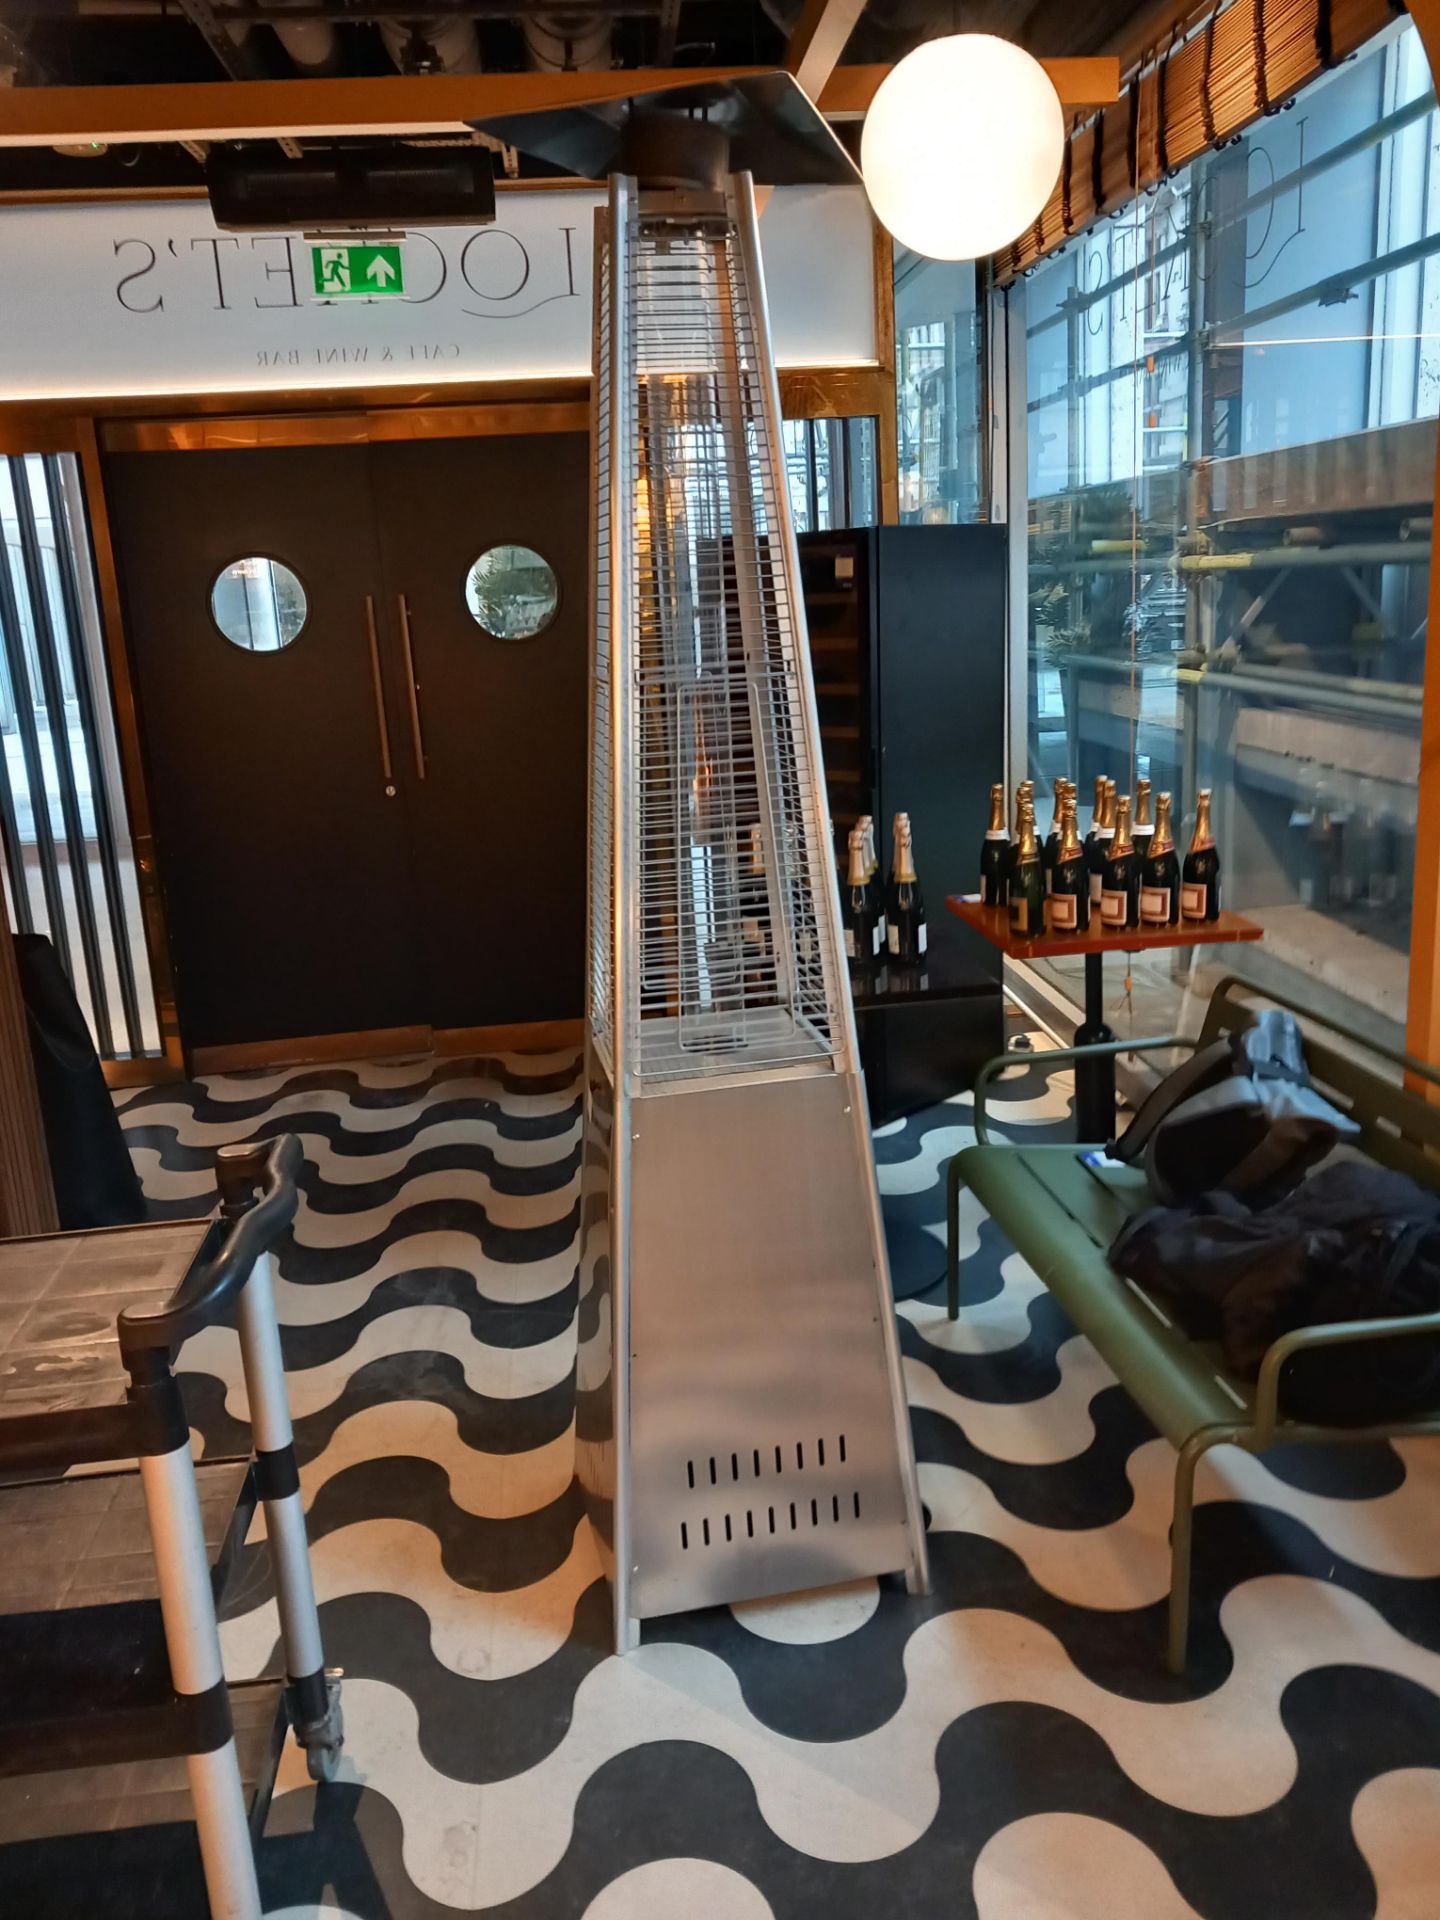 Stainless steel gas fired patio heater